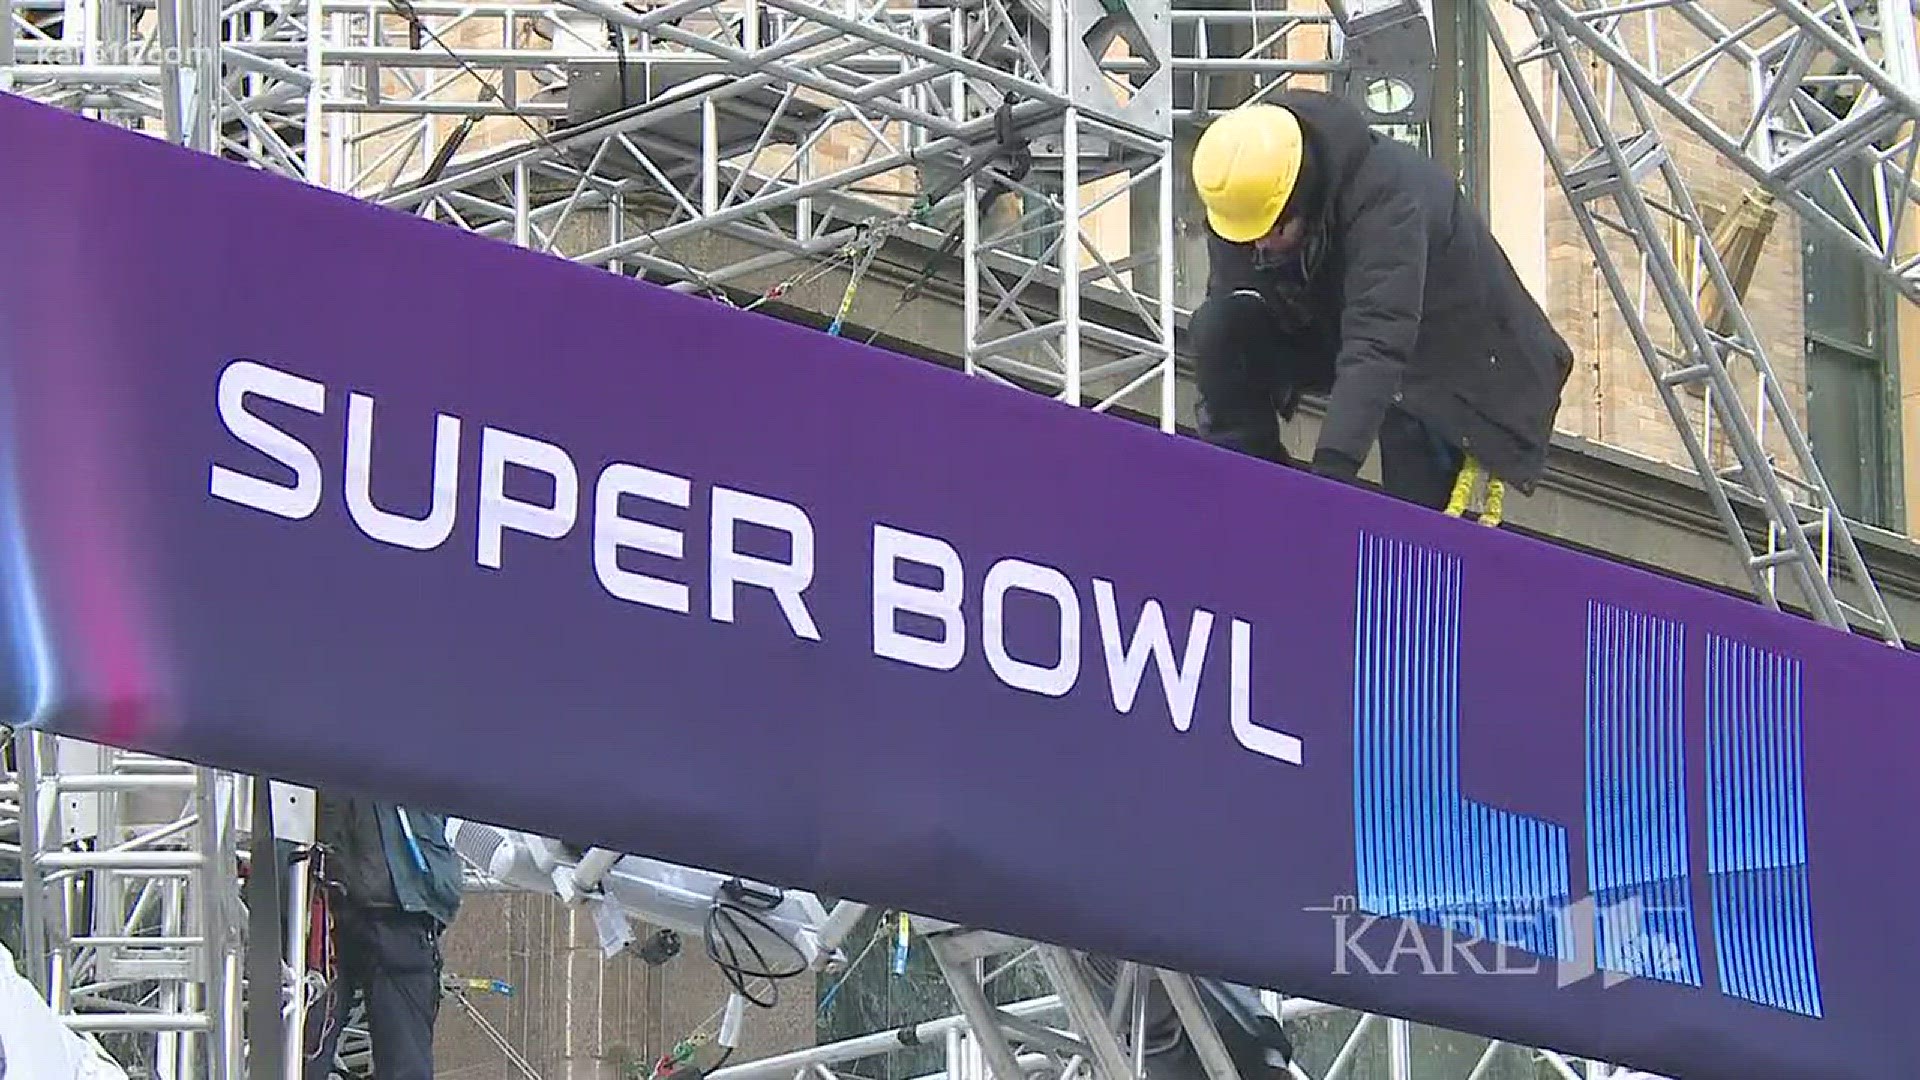 Today it's time to clean up all the special attractions in downtown Minneapolis, at Super Bowl Live and beyond.